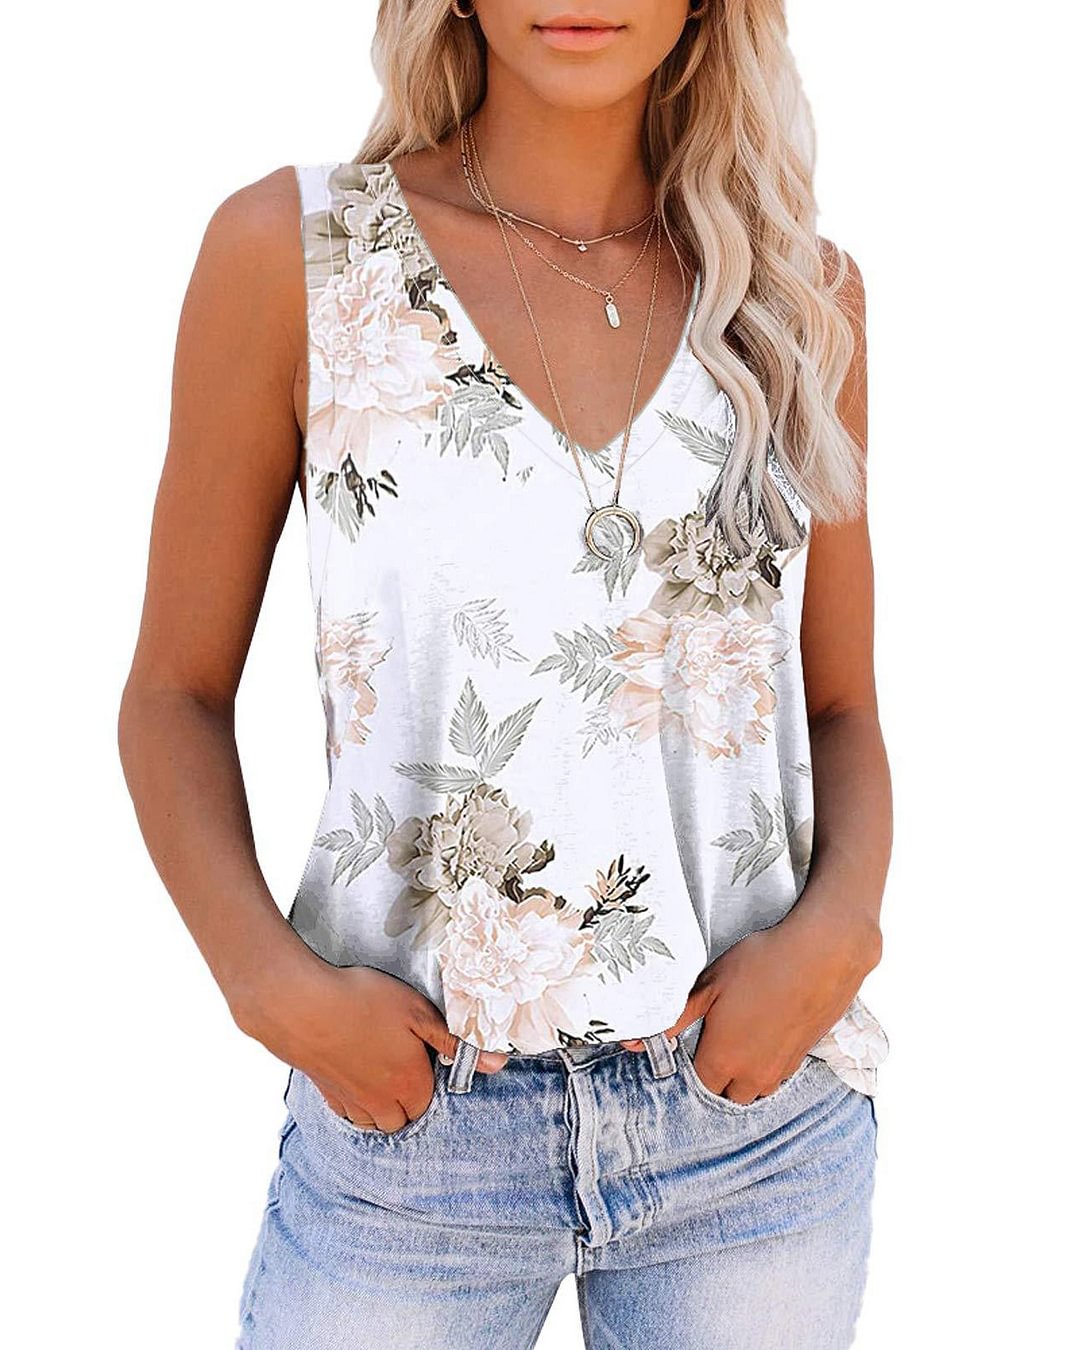 2022 summer new hot sale women's casual sexy vest